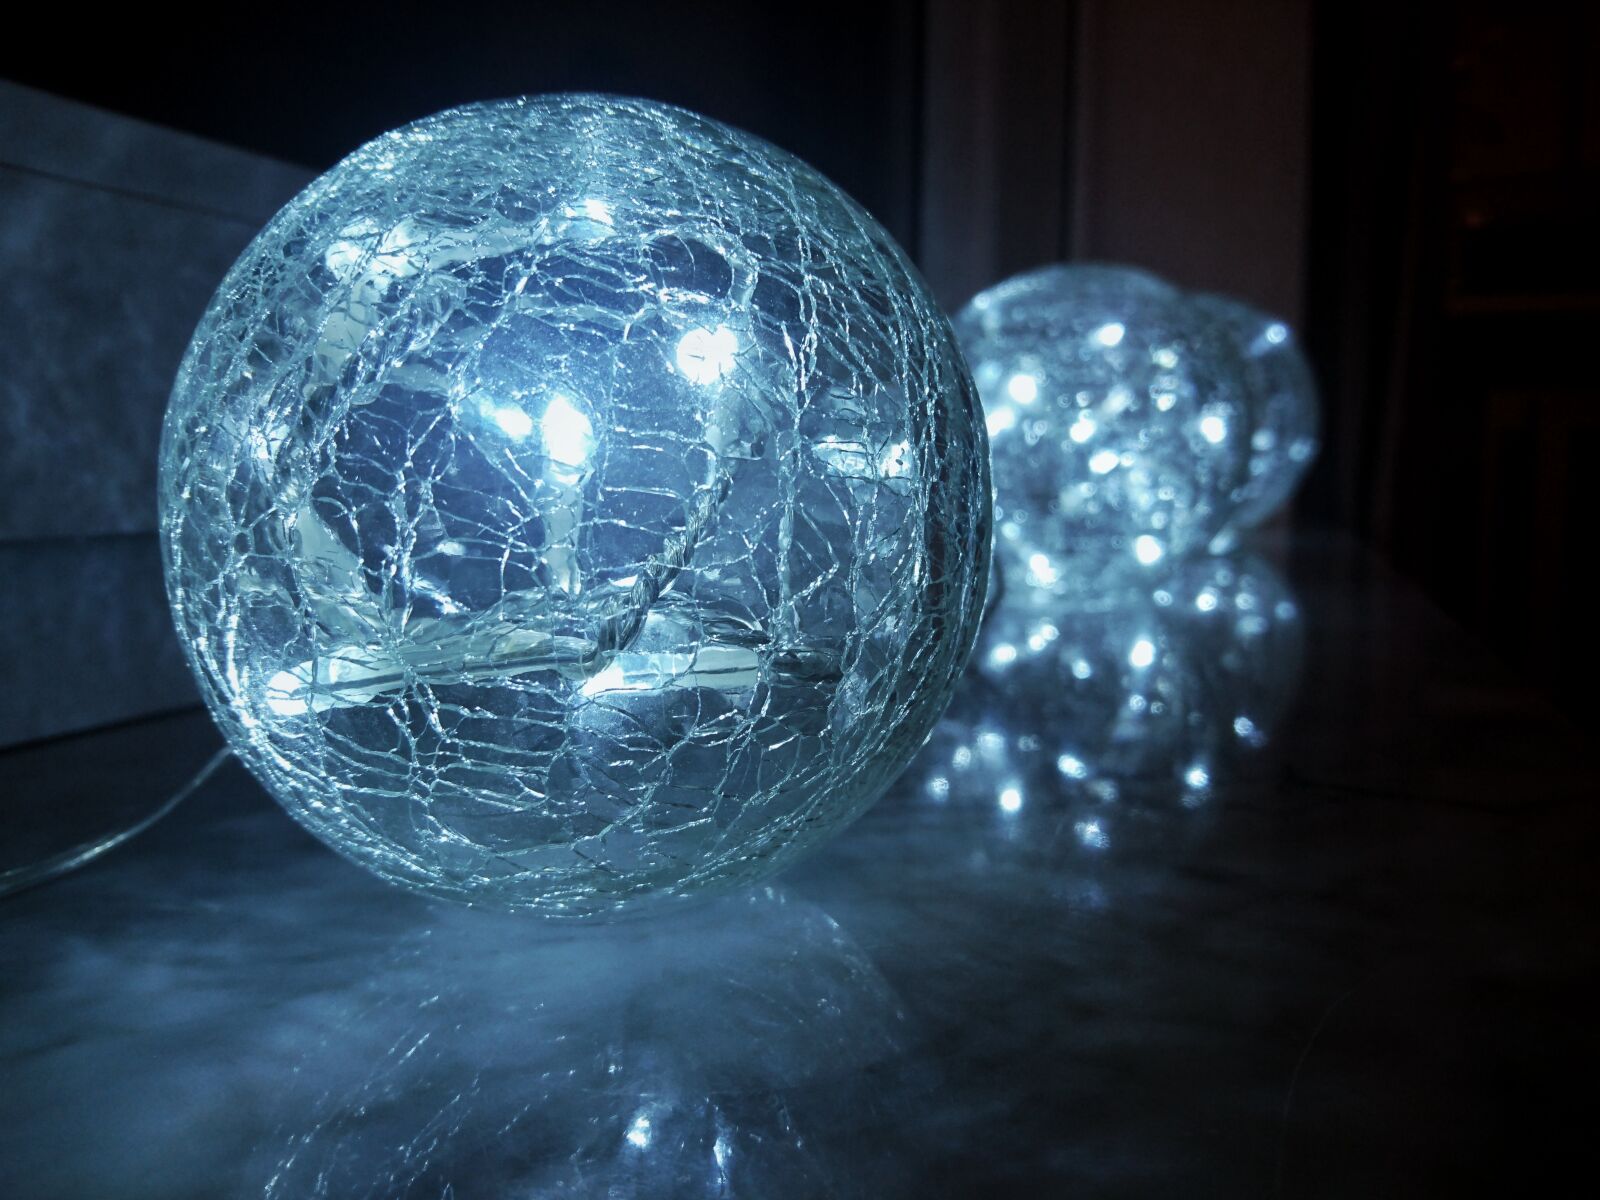 Sony Xperia Z5 Compact sample photo. Ball, lichterkette, christmas photography